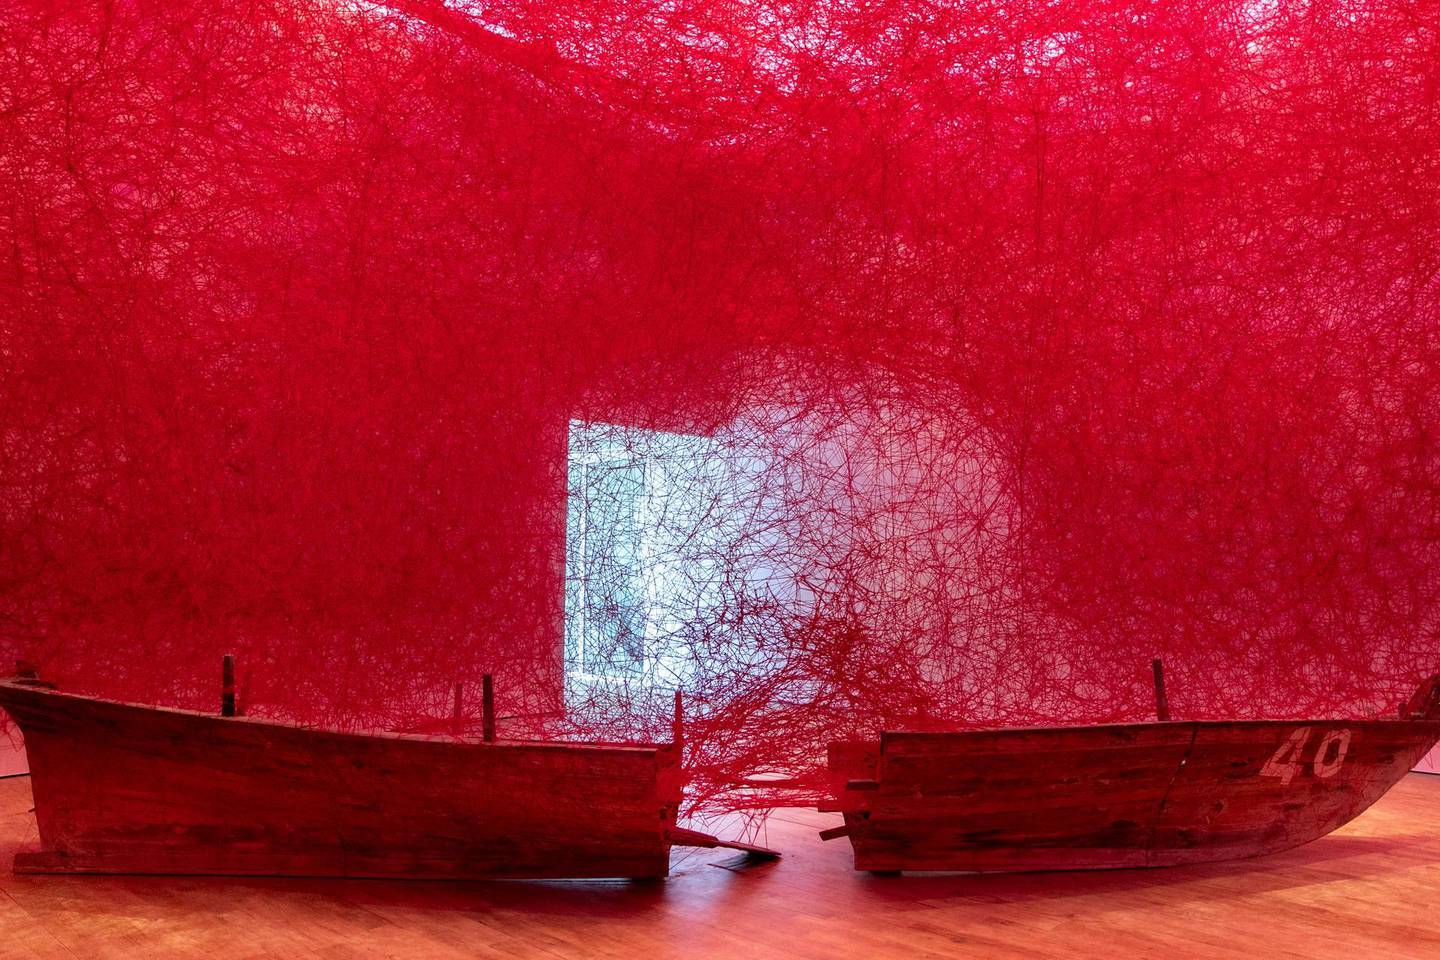 DUBAI, UNITED ARAB EMIRATES - NOVEMBER 7, 2018. 

Artist Chiharu Shiota's work at Jameel Arts Center.

The Jameel Arts Center is set to open on November 11, Located at the Jaddaf Waterfront,  the multidisciplinary space is dedicated to exhibiting contemporary art and engaging communities through learning, research and commissions. It houses several gallery spaces, an open access library and research centre, project and commissions spaces, a writer���s studio, indoor and outdoor event spaces, a roof terrace for film screenings and other events, a bookstore dedicated to arts and culture related publications, a caf�� and a full-service restaurant.

The centre is one of the first independent not-for-profit contemporary arts institutions in the city. It is founded and supported by Art Jameel, an independent organisation that fosters contemporary art practice, cultural heritage protection, and creative entrepreneurship across the Middle East, North Africa and beyond.

(Photo by Reem Mohammed/The National)

Reporter: MELISSA GRONLUND
Section:  AC WK